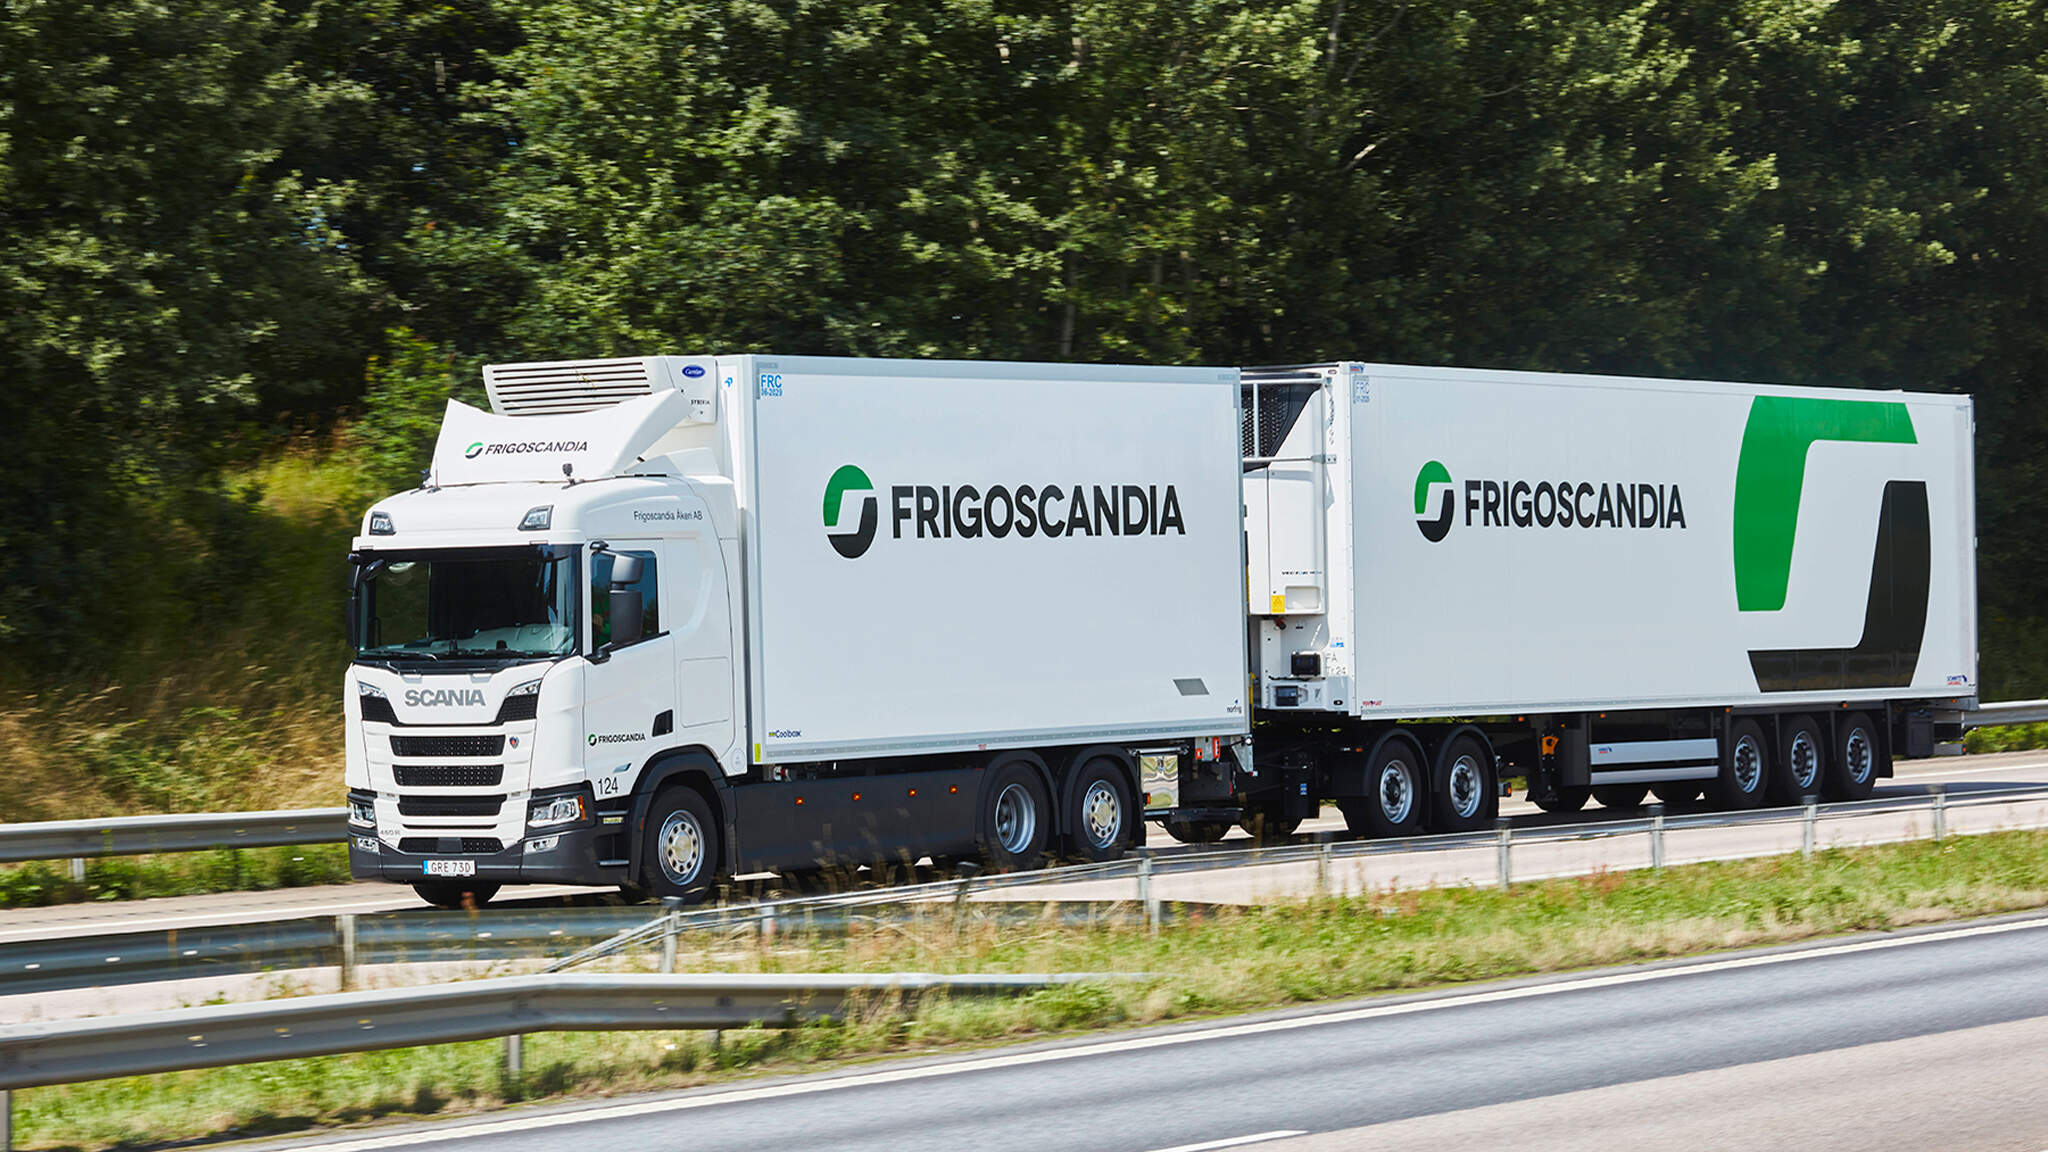 DACHSER strengthens its Food Logistics network in Europe and raises its partnership with Frigoscandia to a new level.